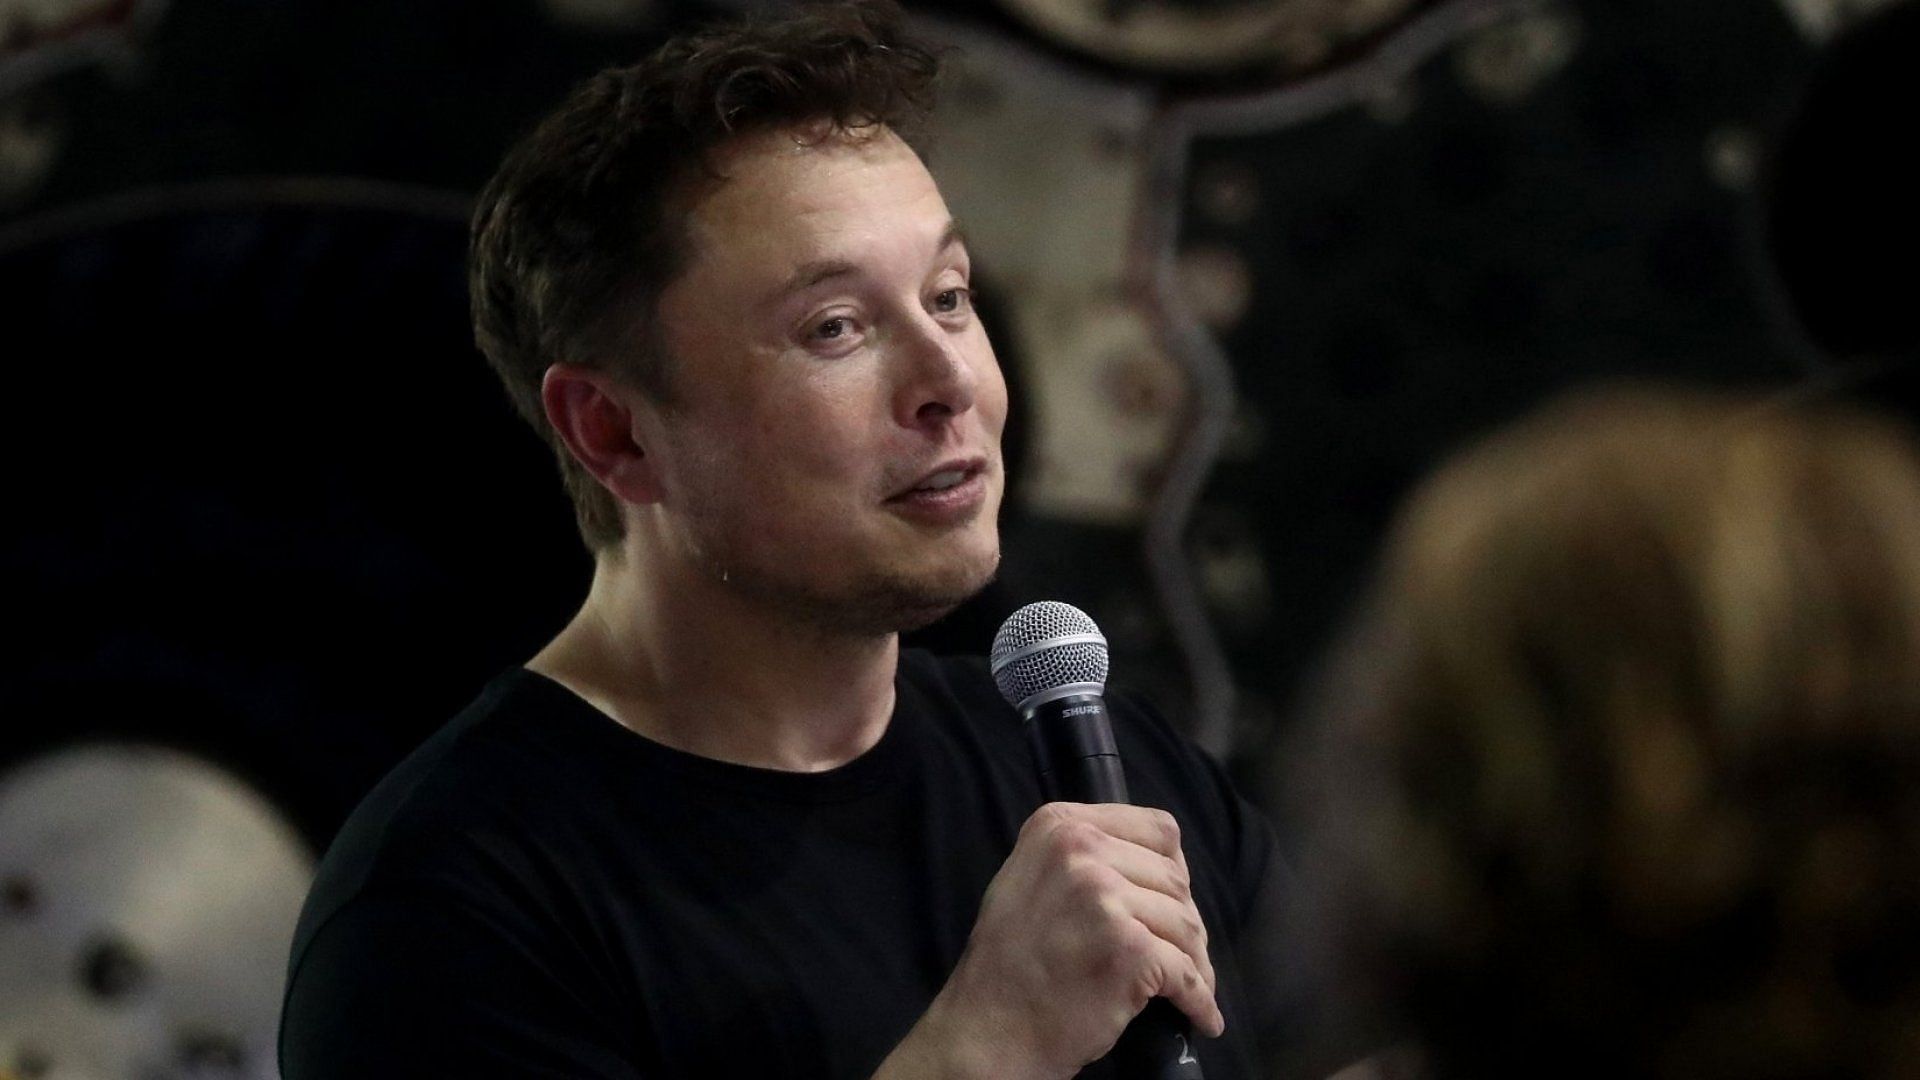 Elon Musk, CEO of Tesla, has stated that all hiring at the electric vehicle company has been halted ( Image via Getty Images)